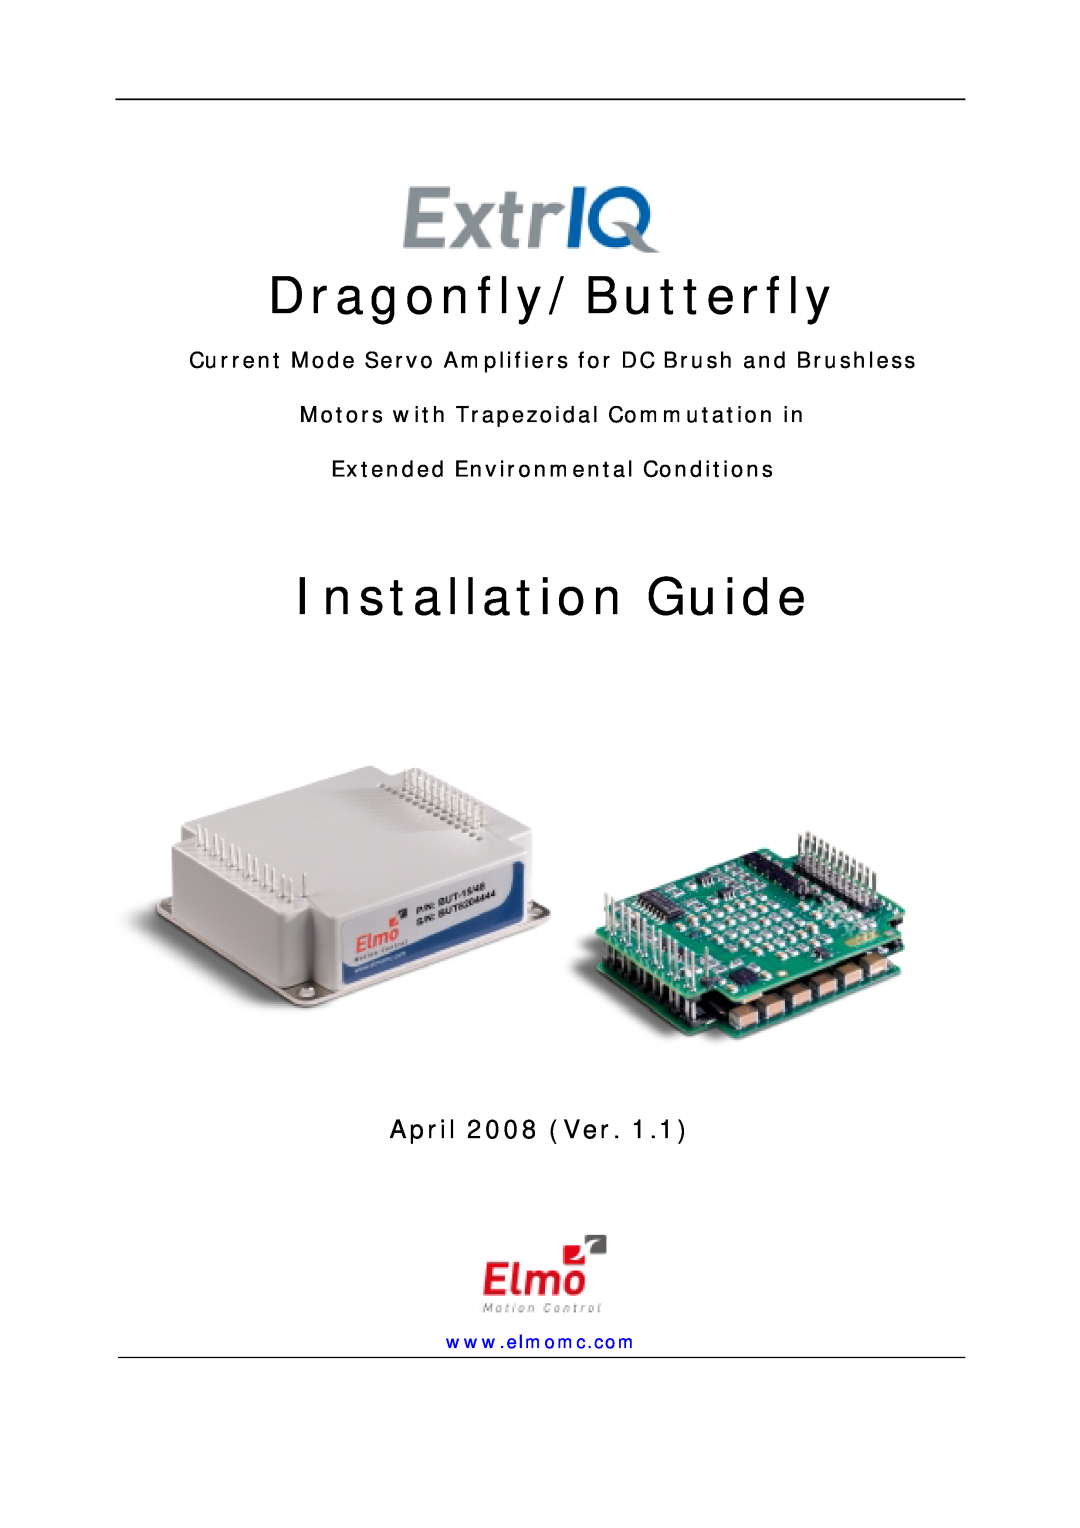 Elmo BUT- X/YYY manual April 2008 Ver, Current Mode Servo Amplifiers for DC Brush and Brushless, Dragonfly/Butterfly 